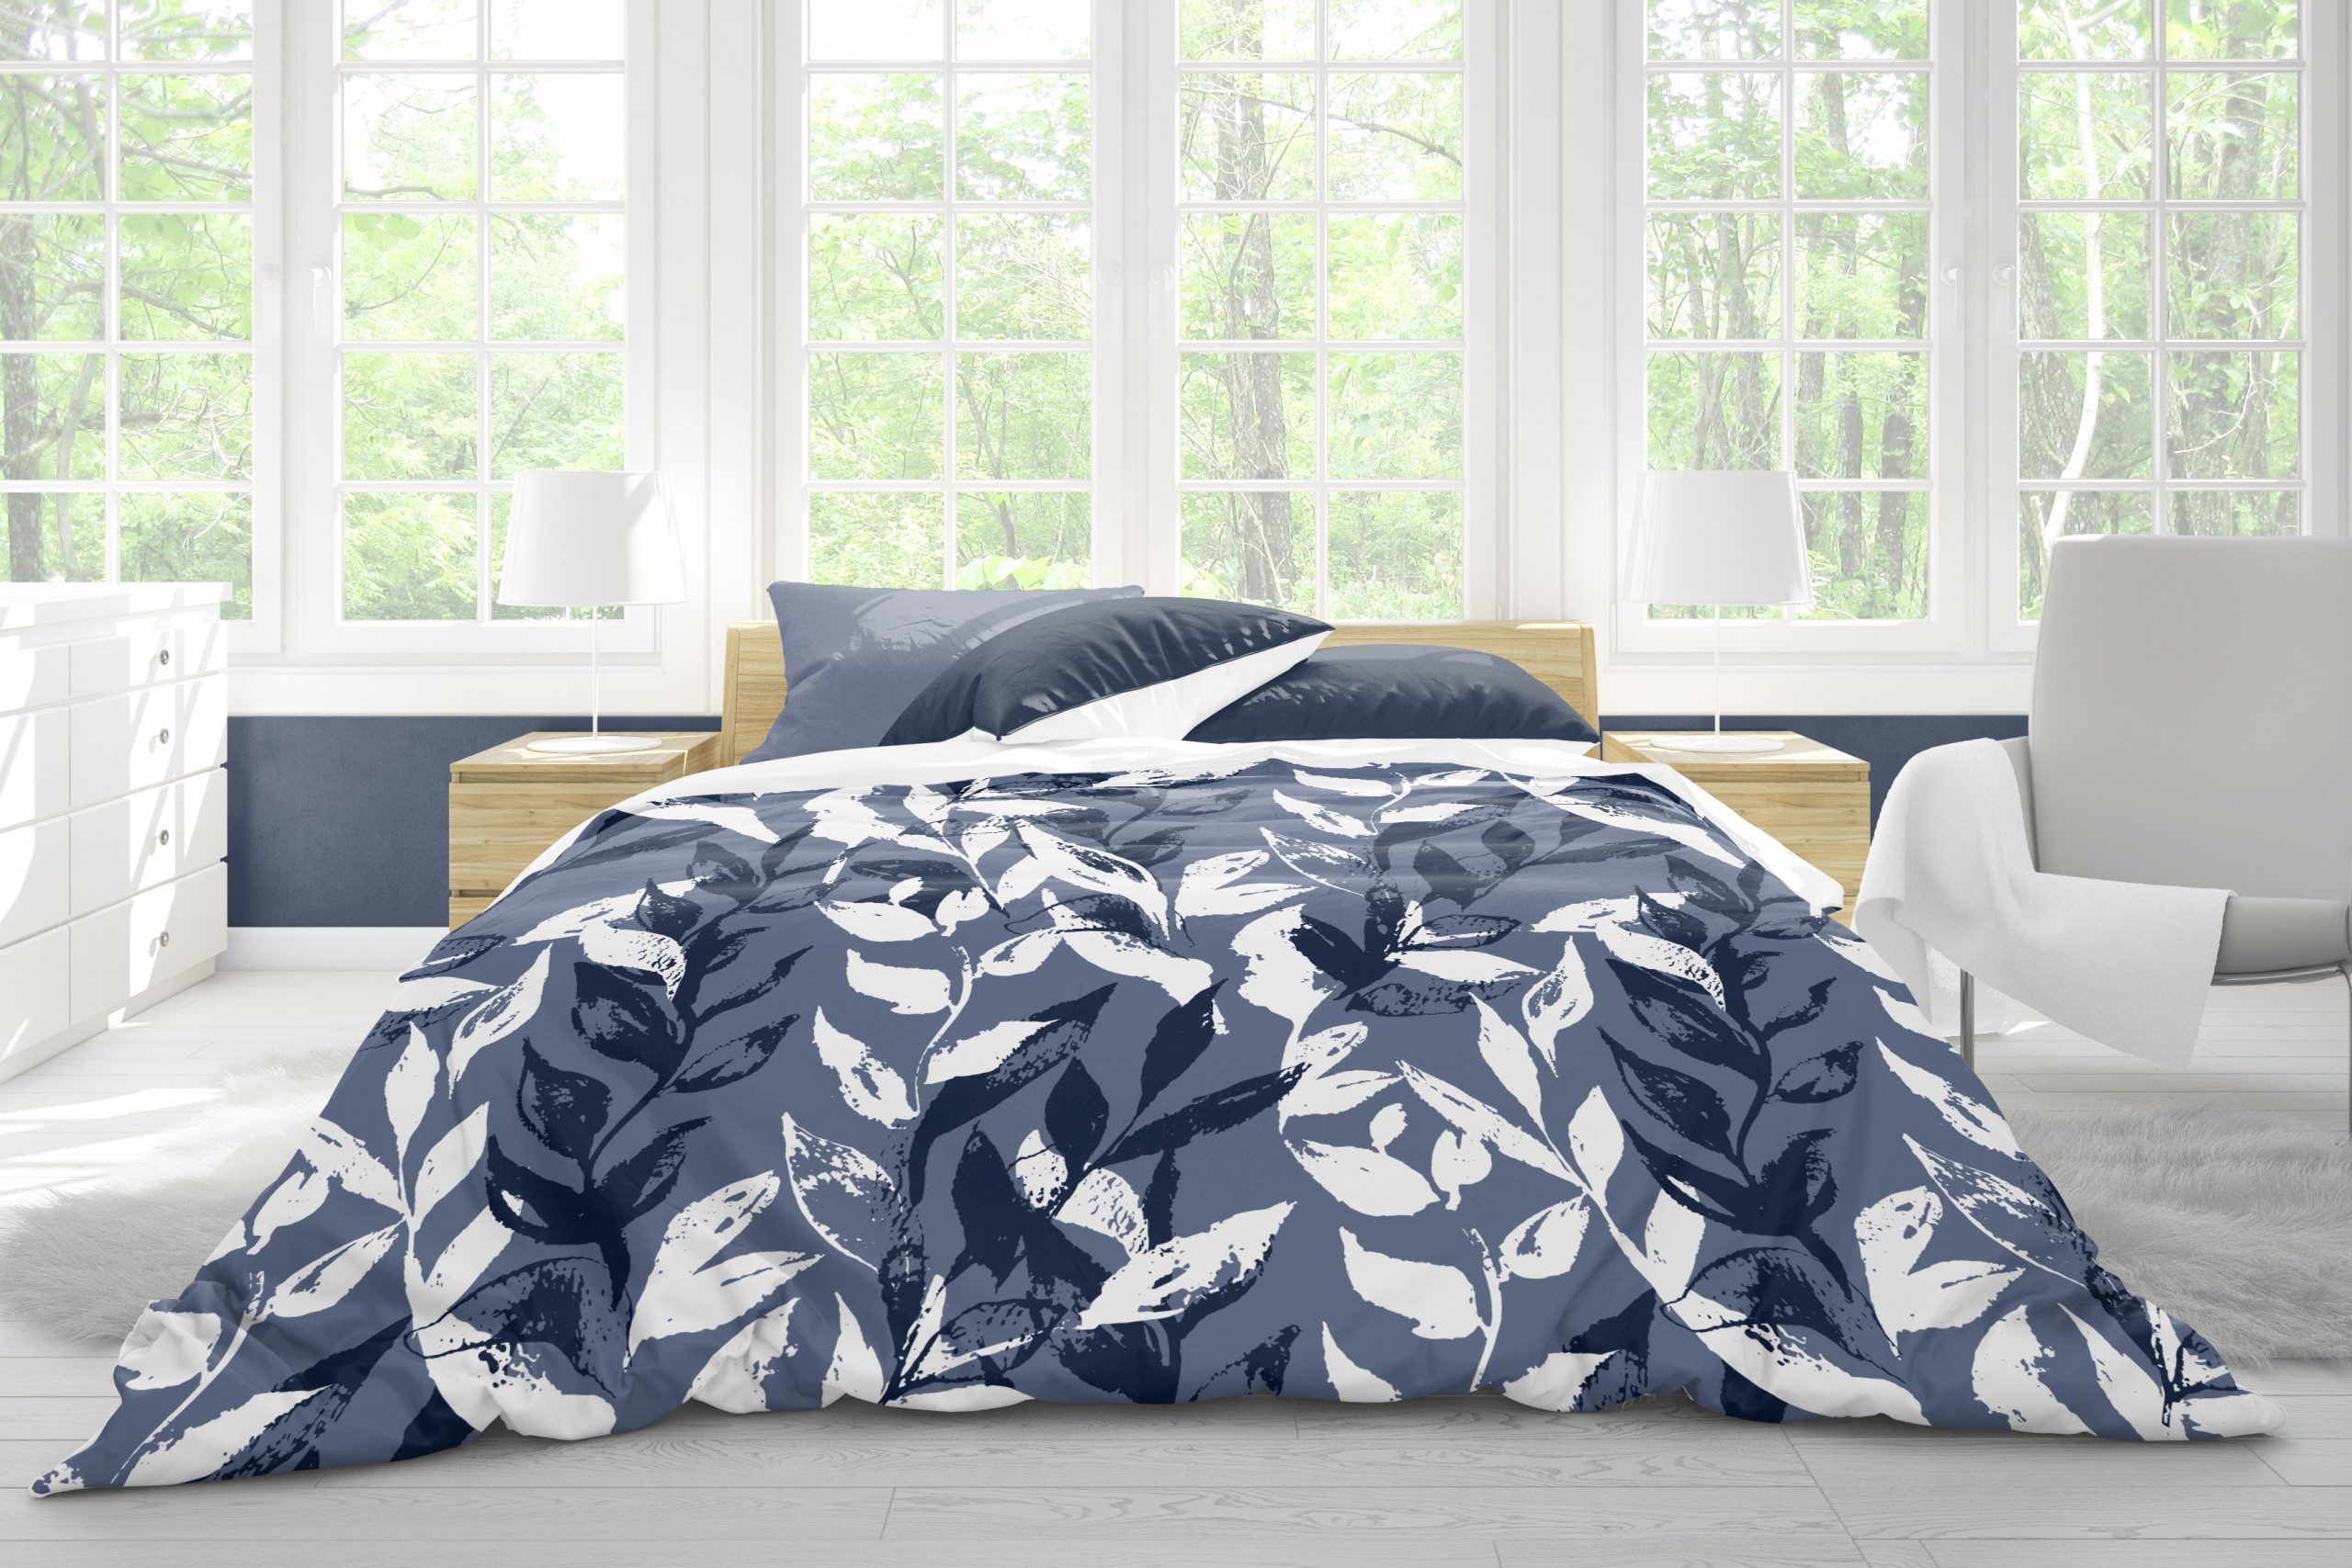 The Art of Bedding: Choosing the Perfect Duvet Cover